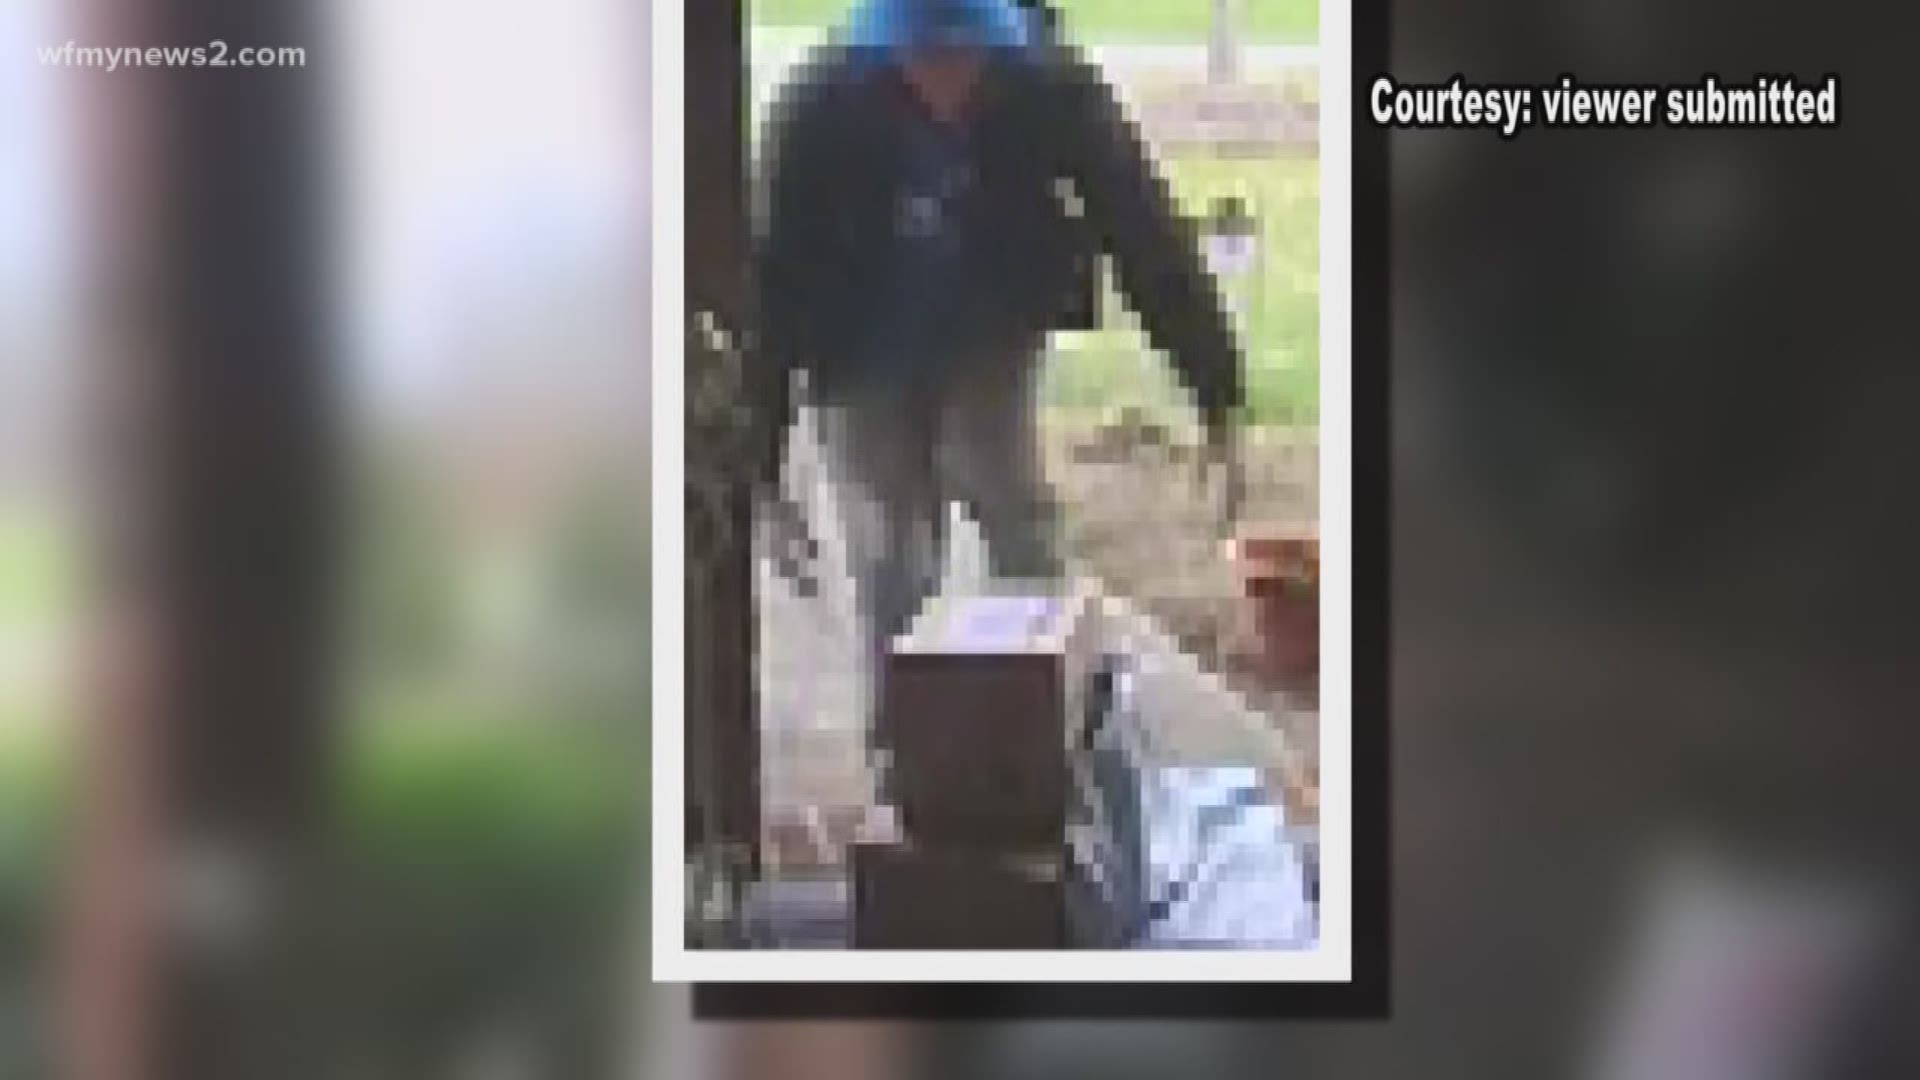 Deputies say a suspected porch pirate had been stealing packages for the past couple of weeks.